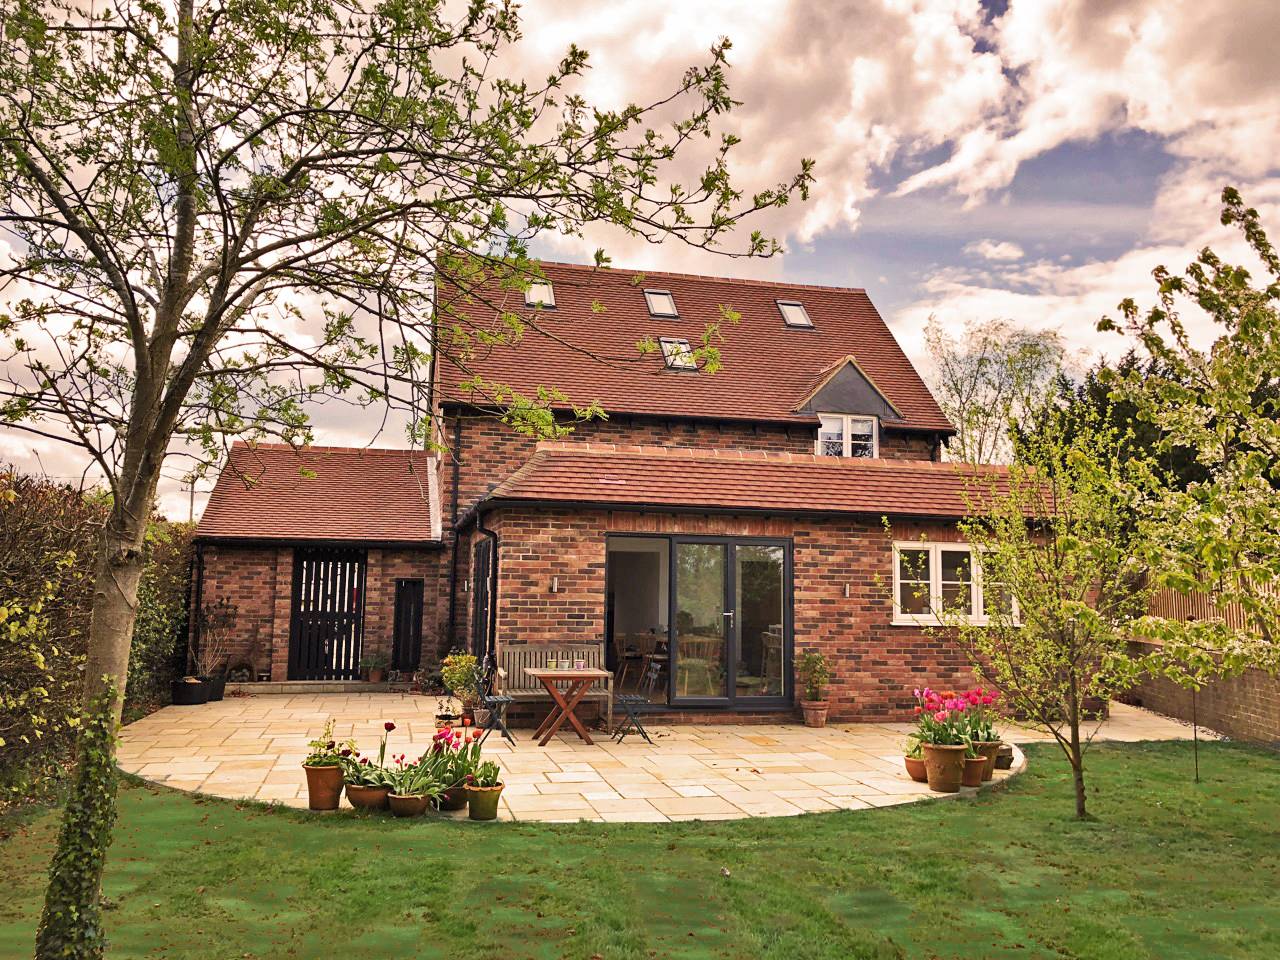 New Build, Detached 4 Bedroom Home In A Conservation Area - Design & Build